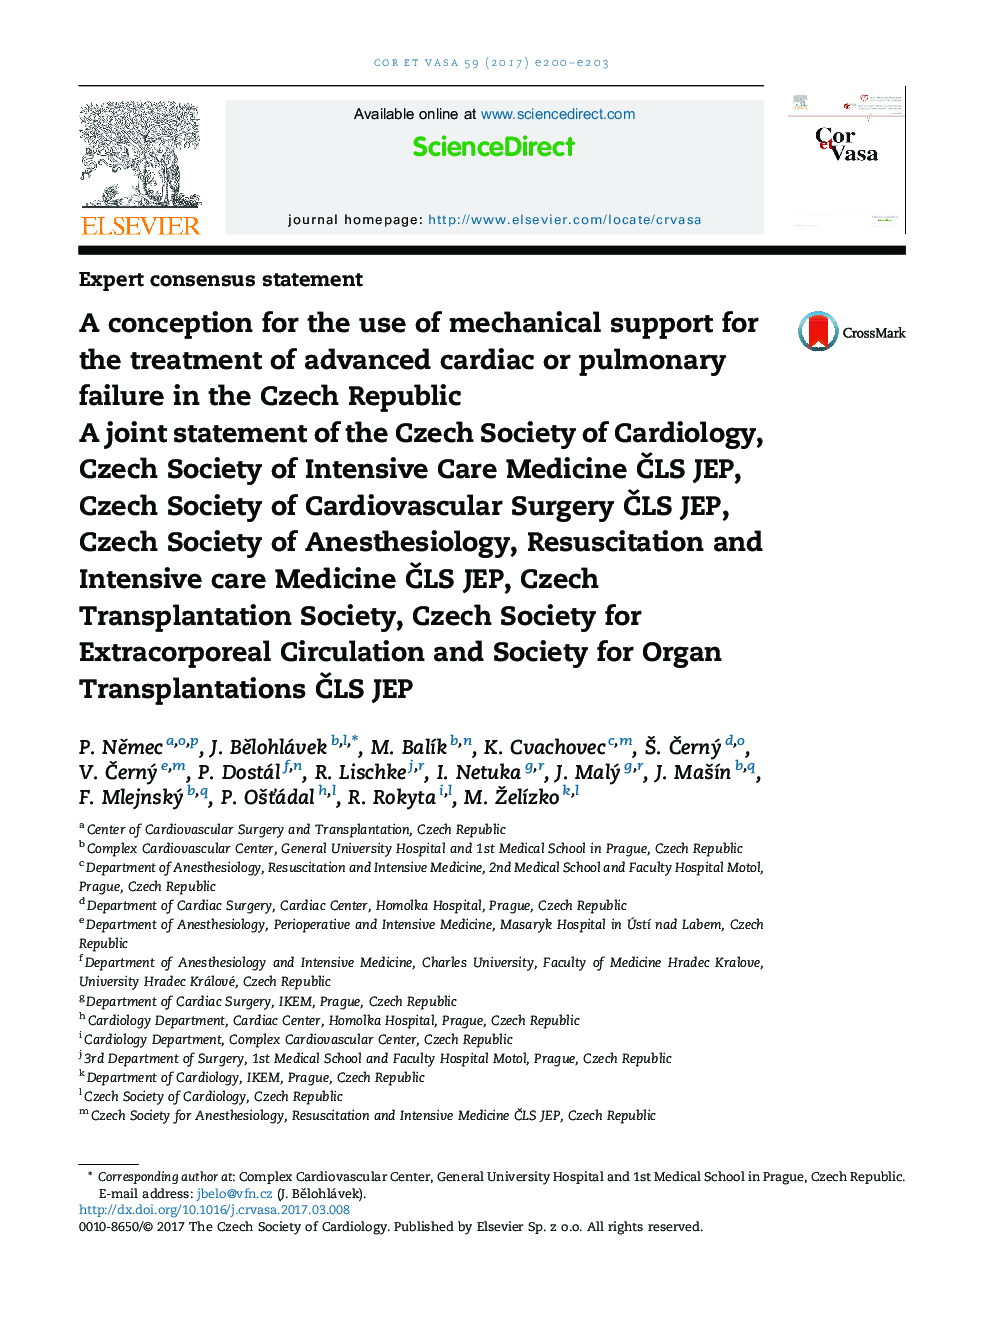 A conception for the use of mechanical support for the treatment of advanced cardiac or pulmonary failure in the Czech Republic